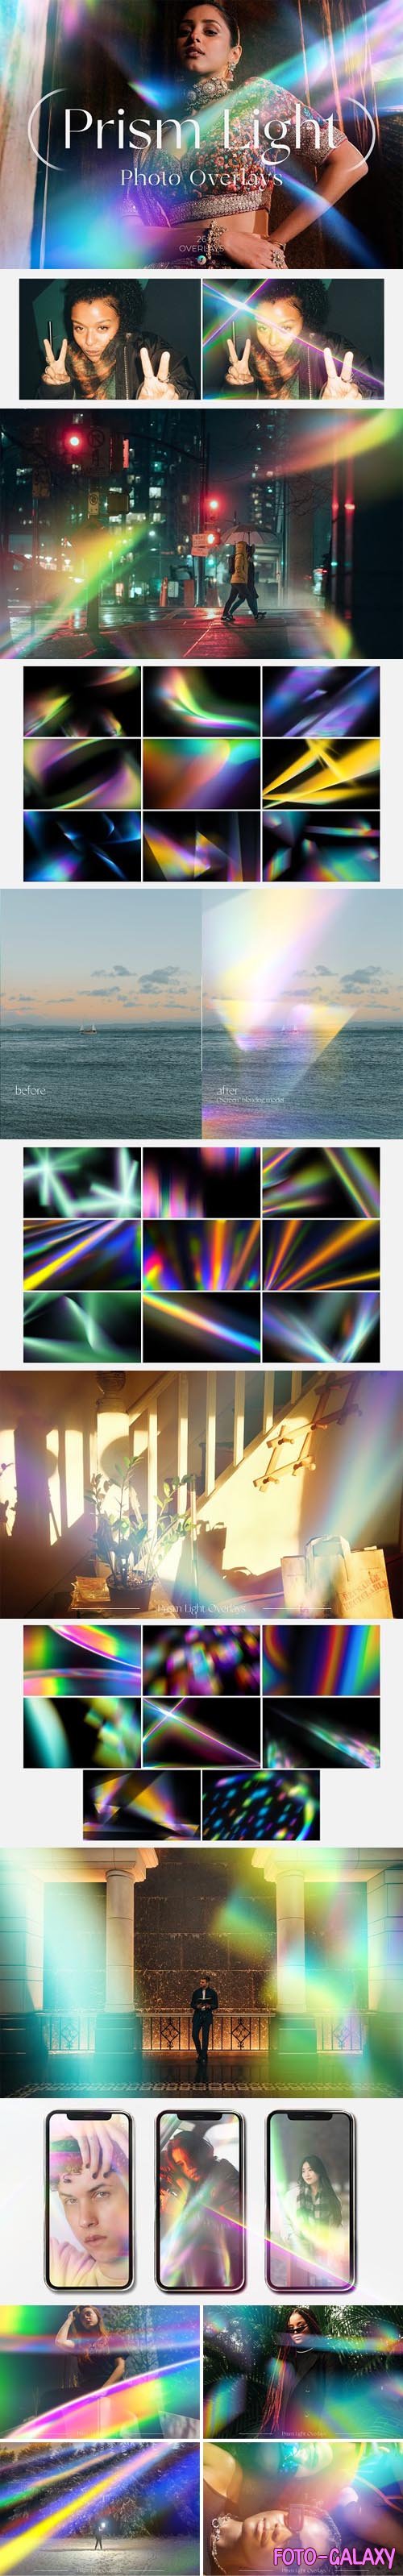 Prism Light Photo Overlays for Photoshop